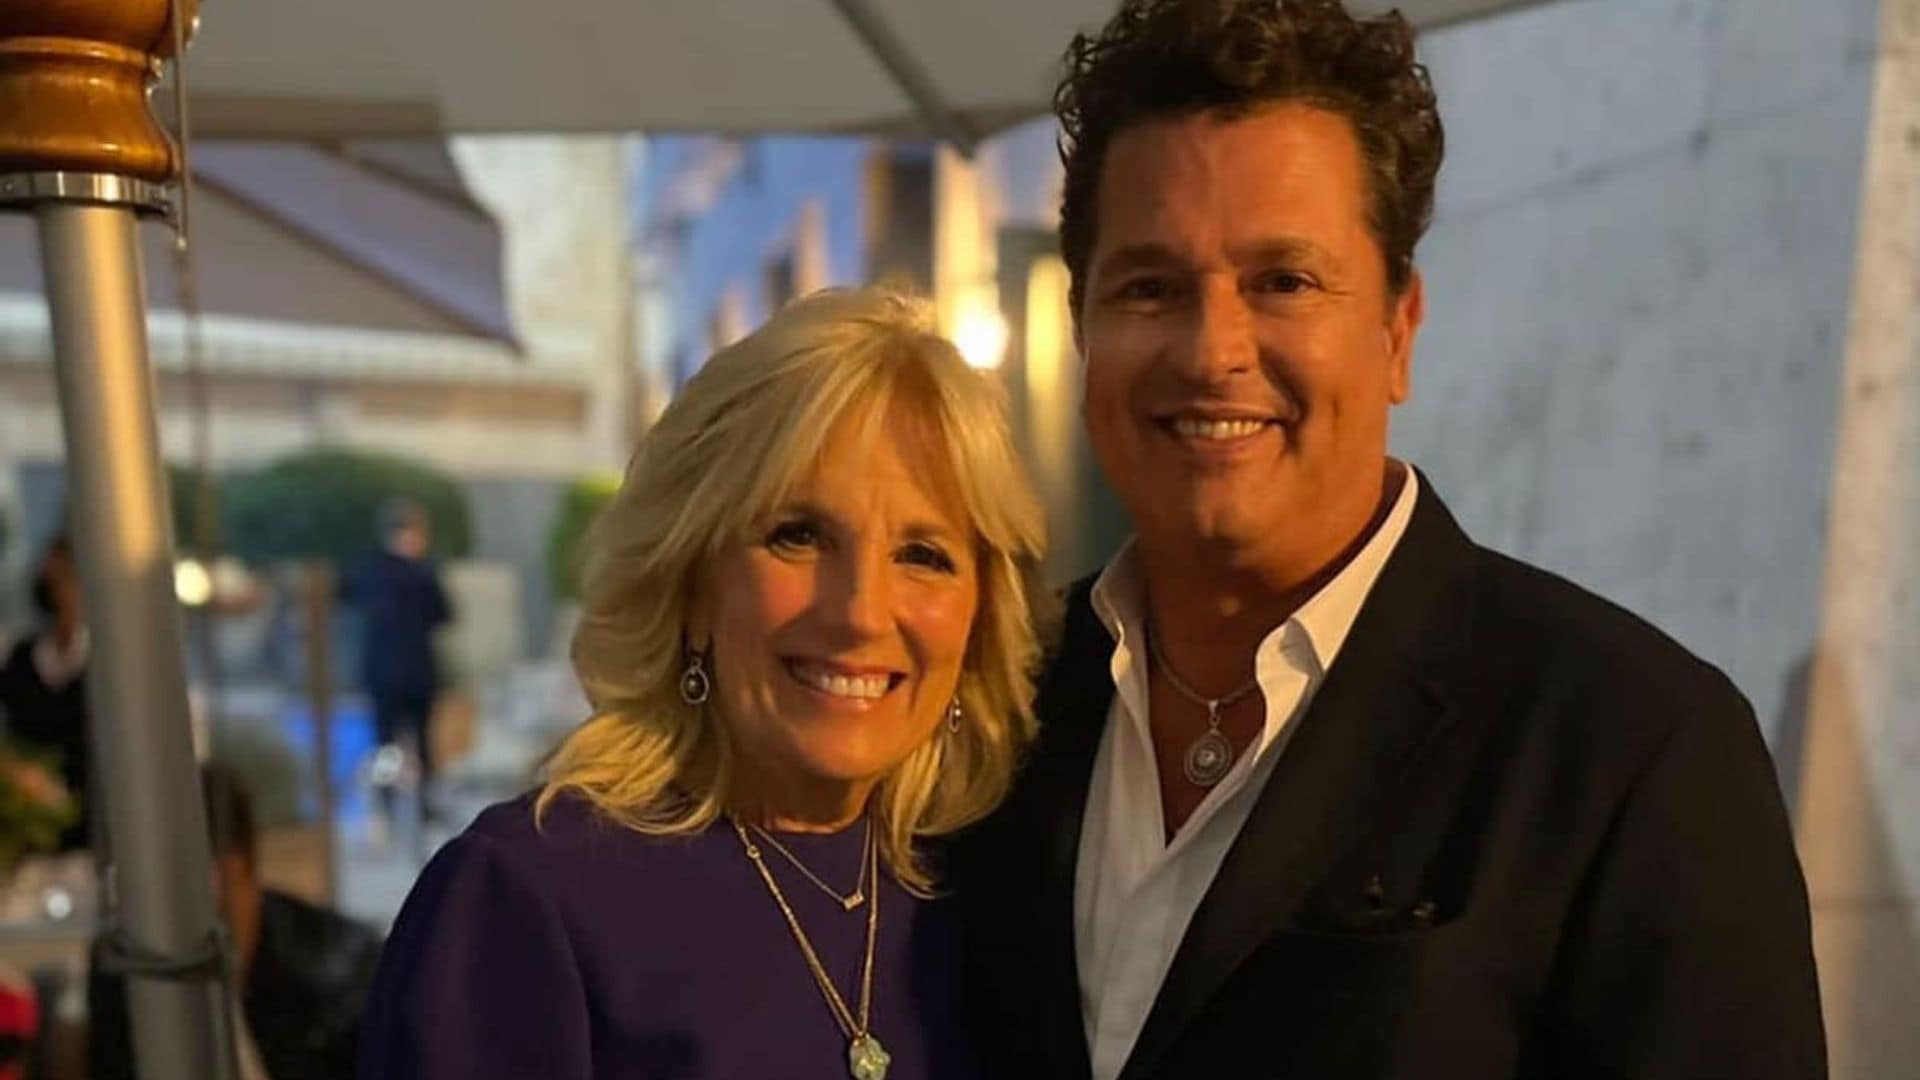 Carlos Vives meets with United States First Lady Dr. Jill Biden in Spain